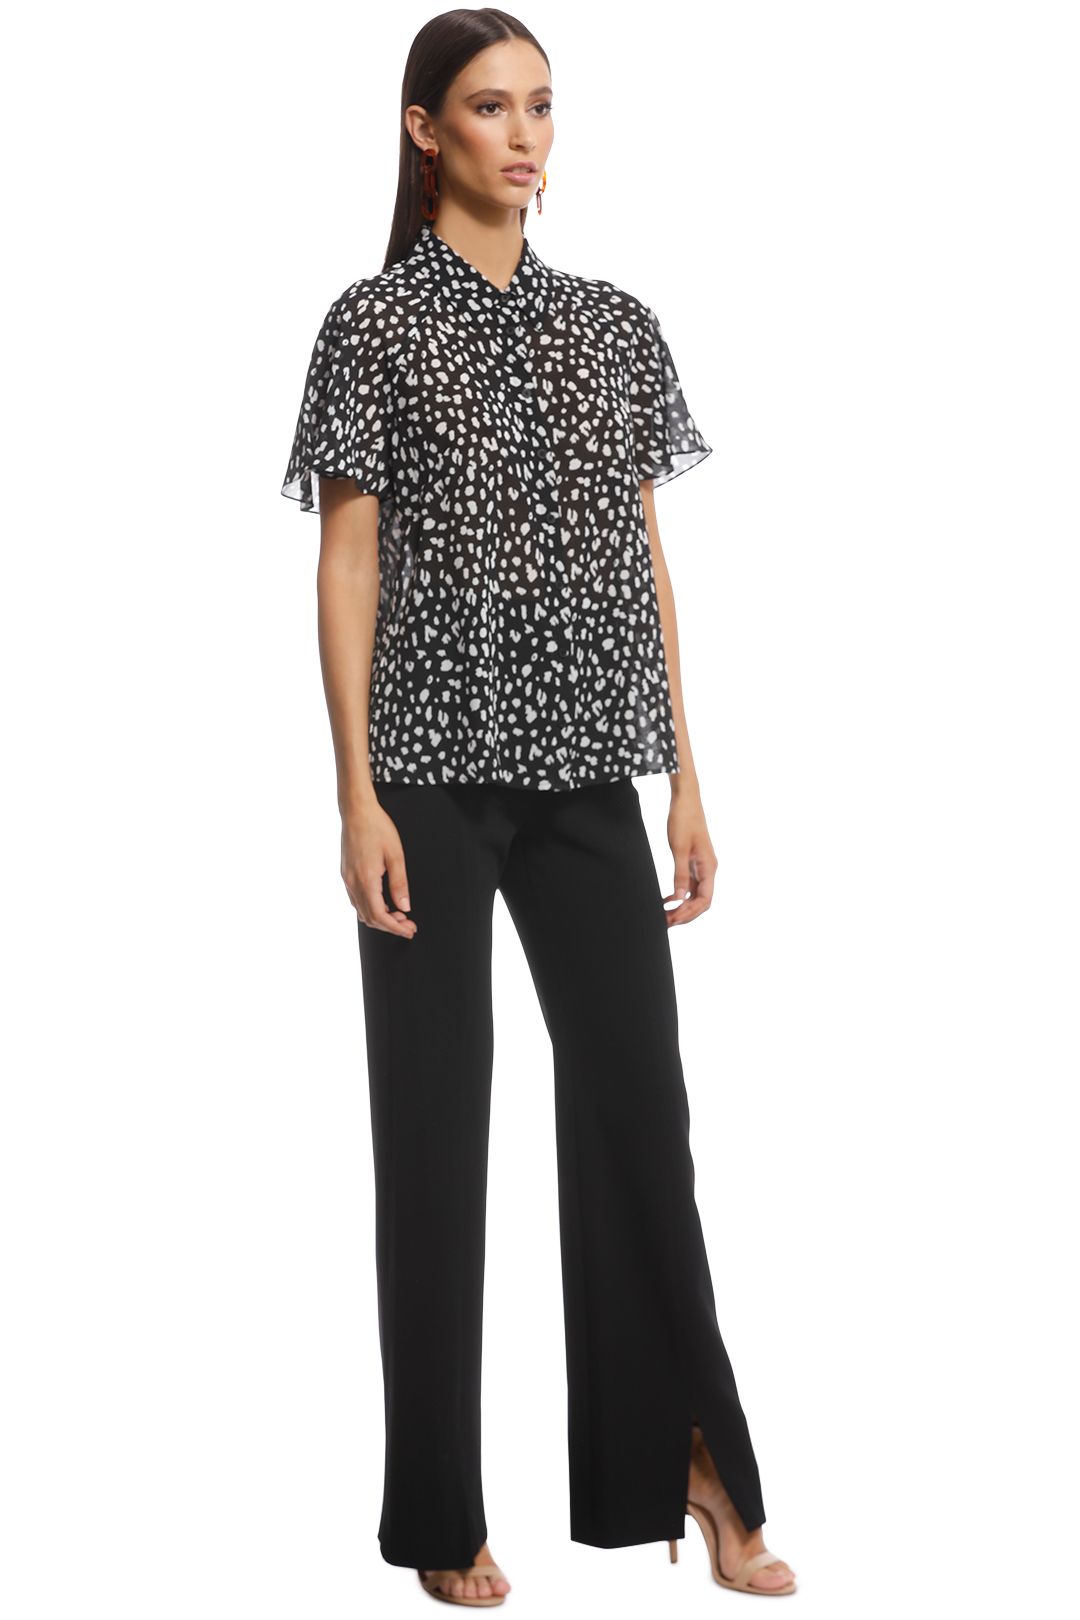 Cue - Animal Georgette Flared Sleeve Shirt - Black and White - Side